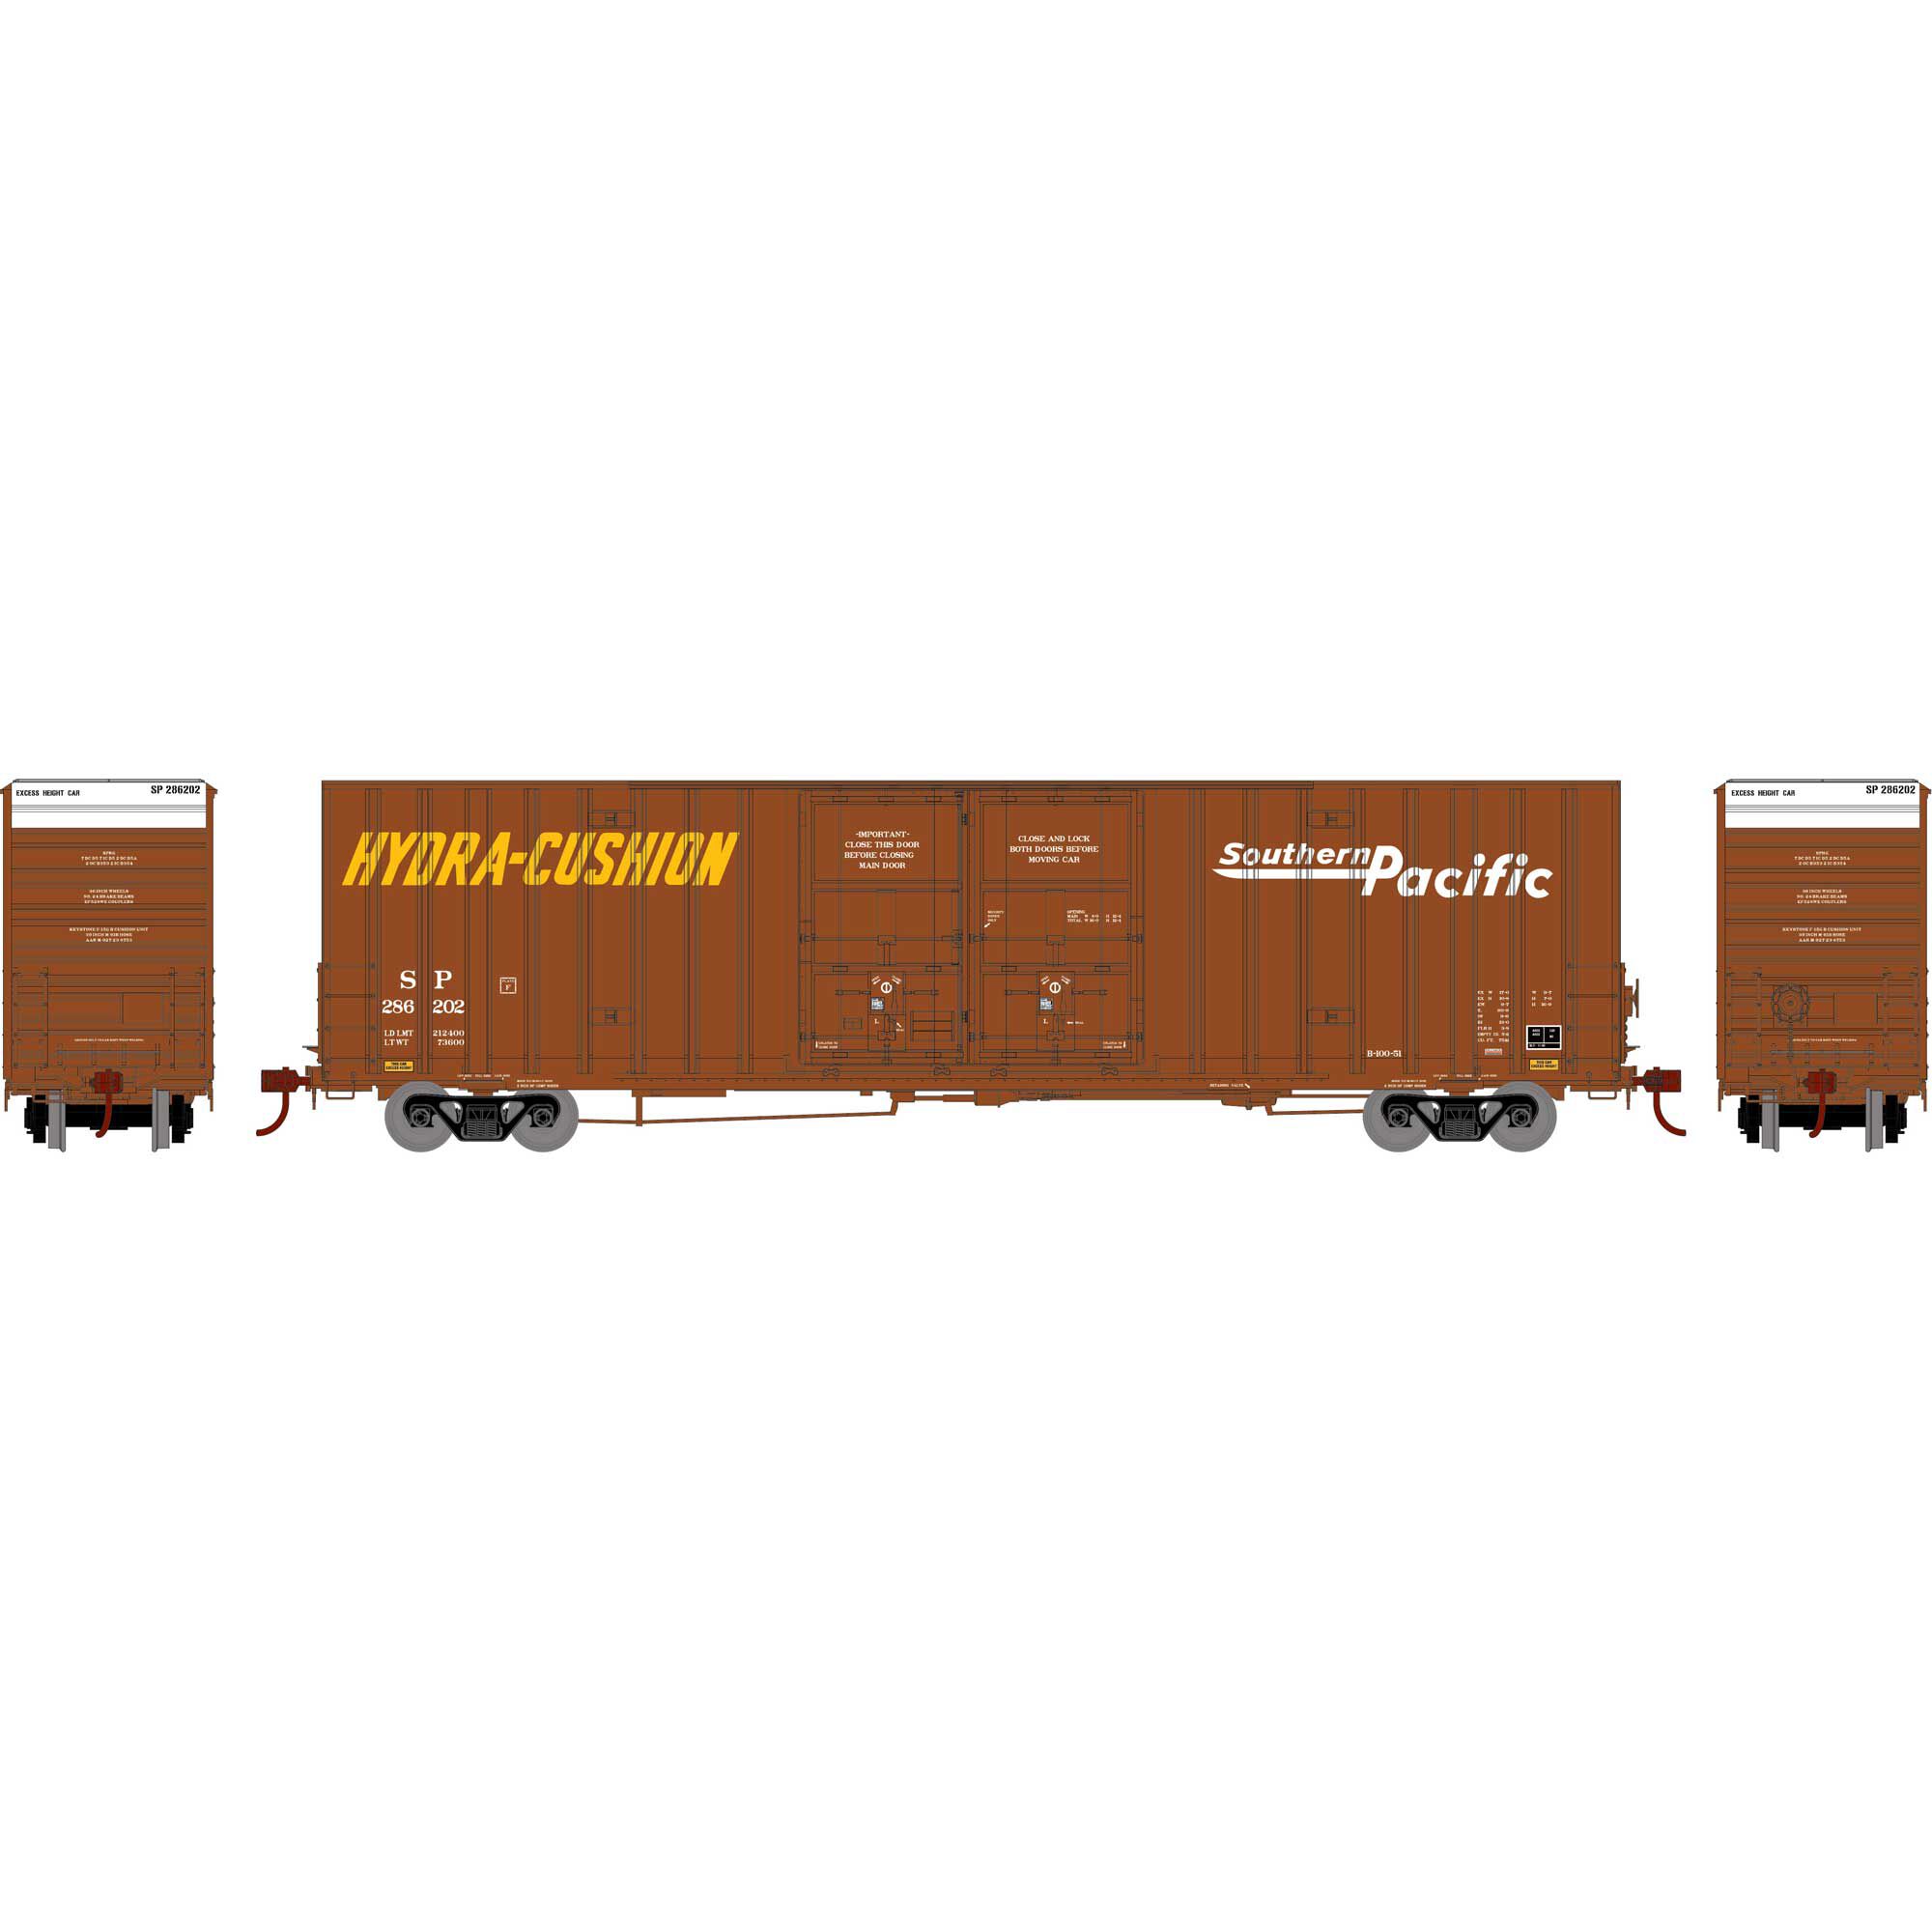 Athearn 75309  HO 60' Gunderson Box, SP/Speed Letter #286202